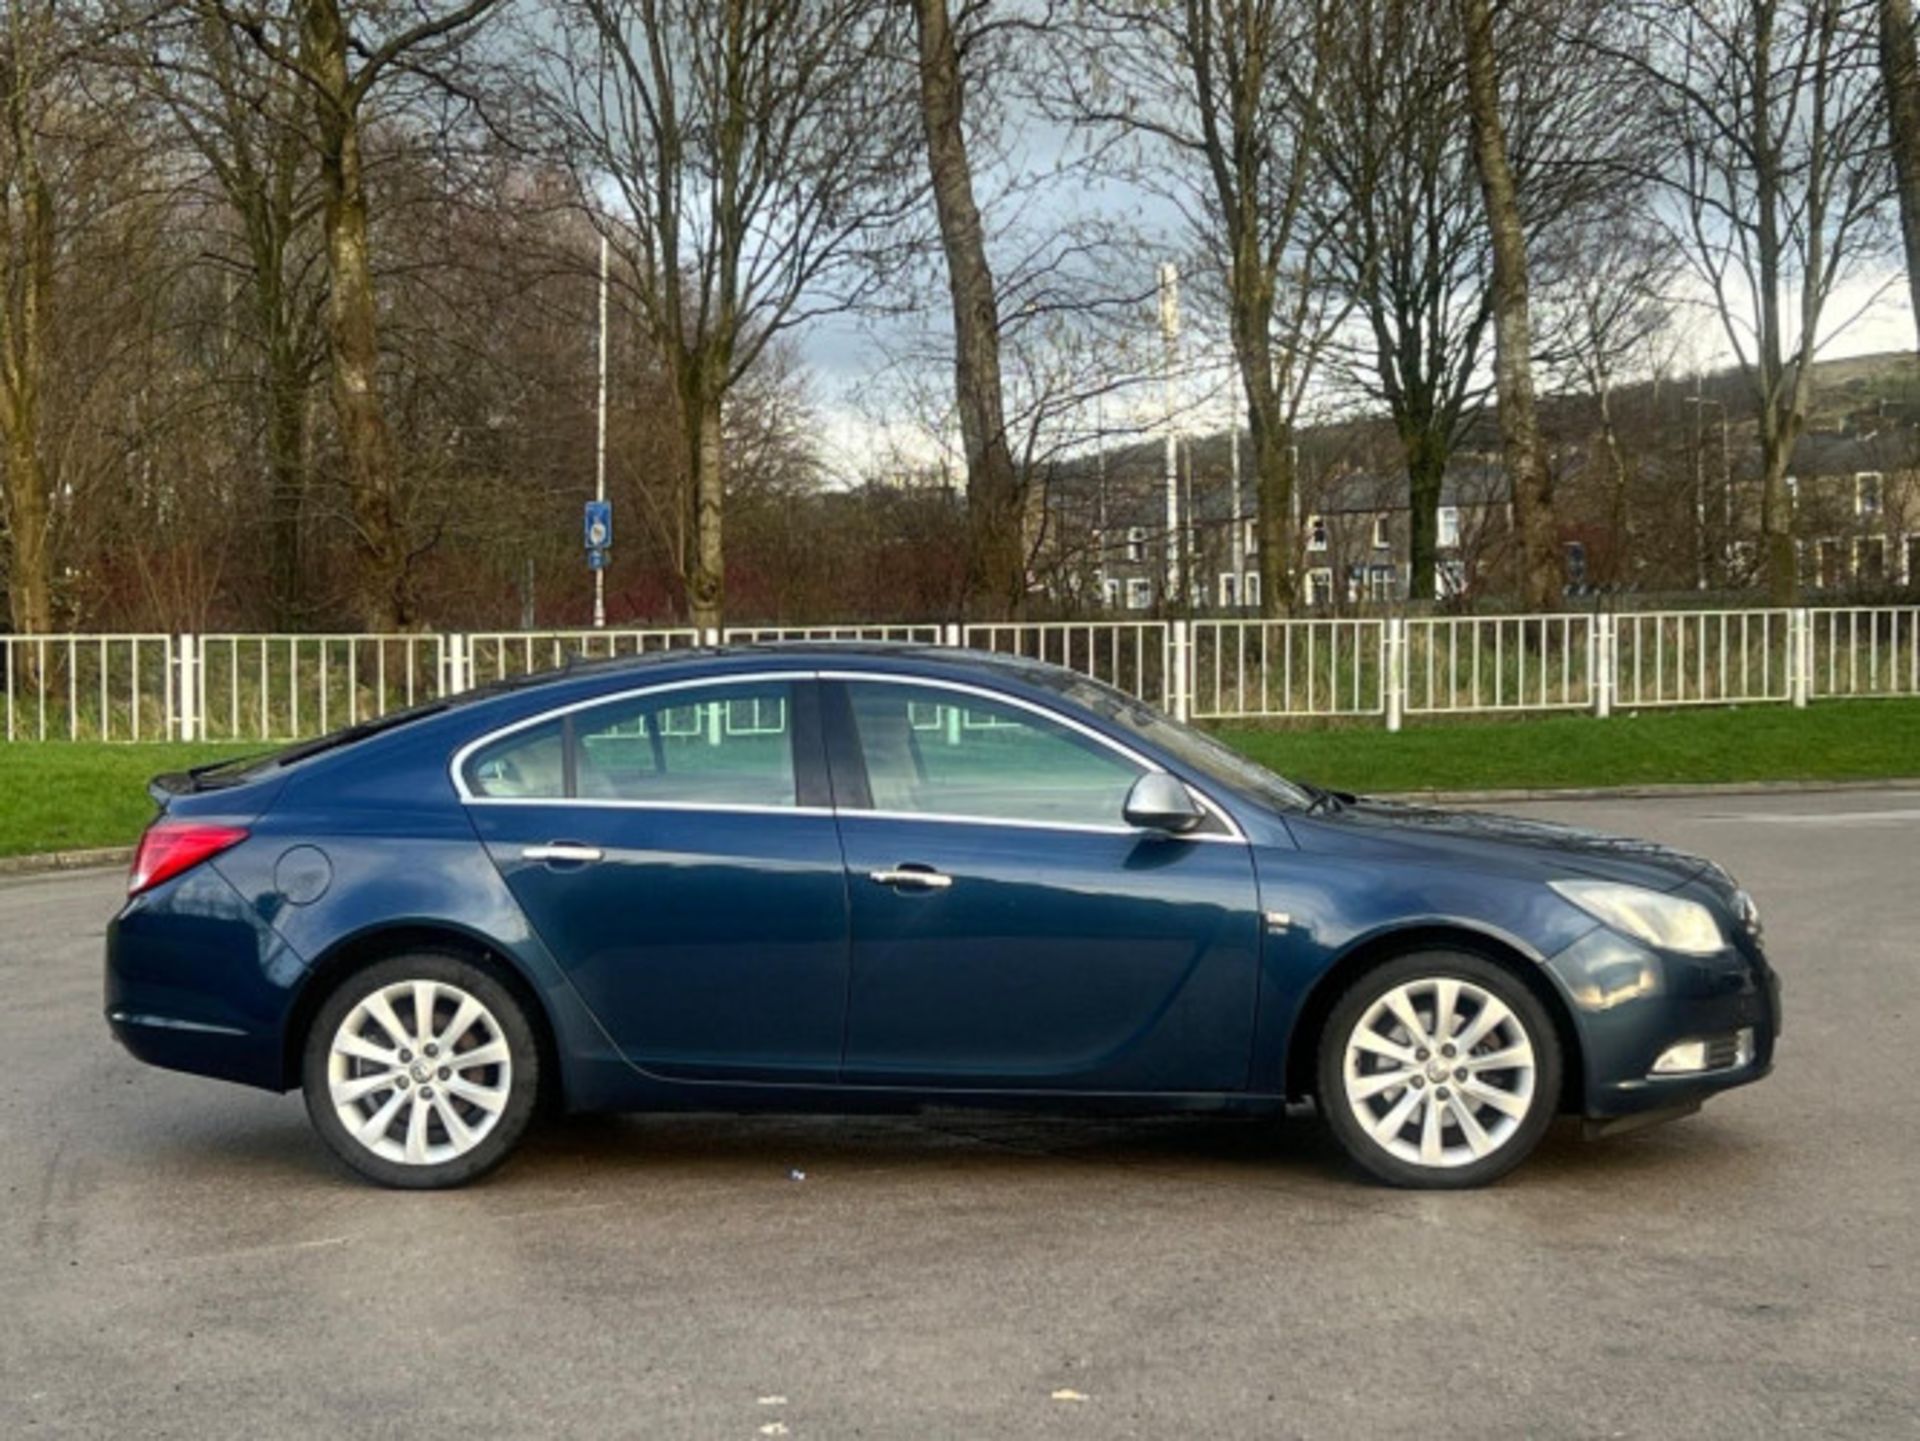 2012 VAUXHALL INSIGNIA 2.0 CDTI ELITE AUTO EURO 5 - DISCOVER EXCELLENCE >>--NO VAT ON HAMMER--<< - Image 115 of 120